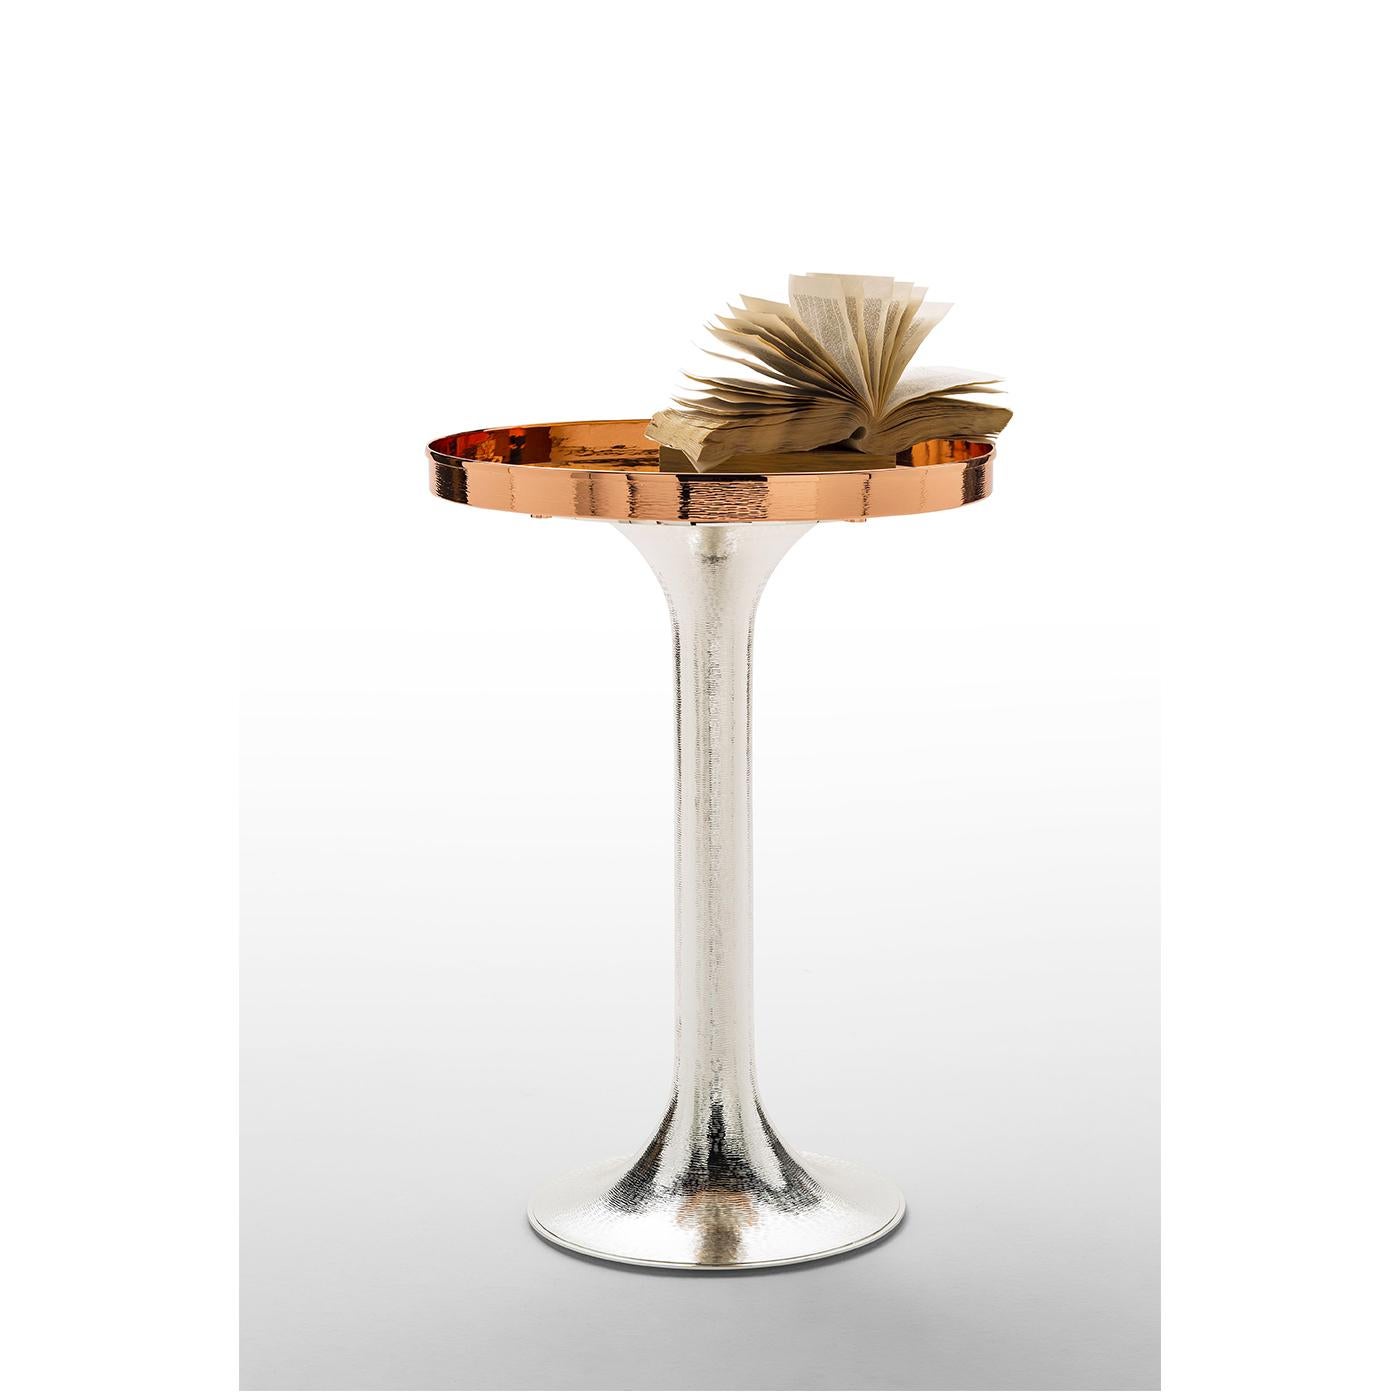 Combining a Minimalist design and refined craftsmanship, this exquisite side table comprises a silver base and a copper top in the shape of a tray. Boasting a shiny, mirrored finish, it will imbue an interior space with sophistication, thanks to its